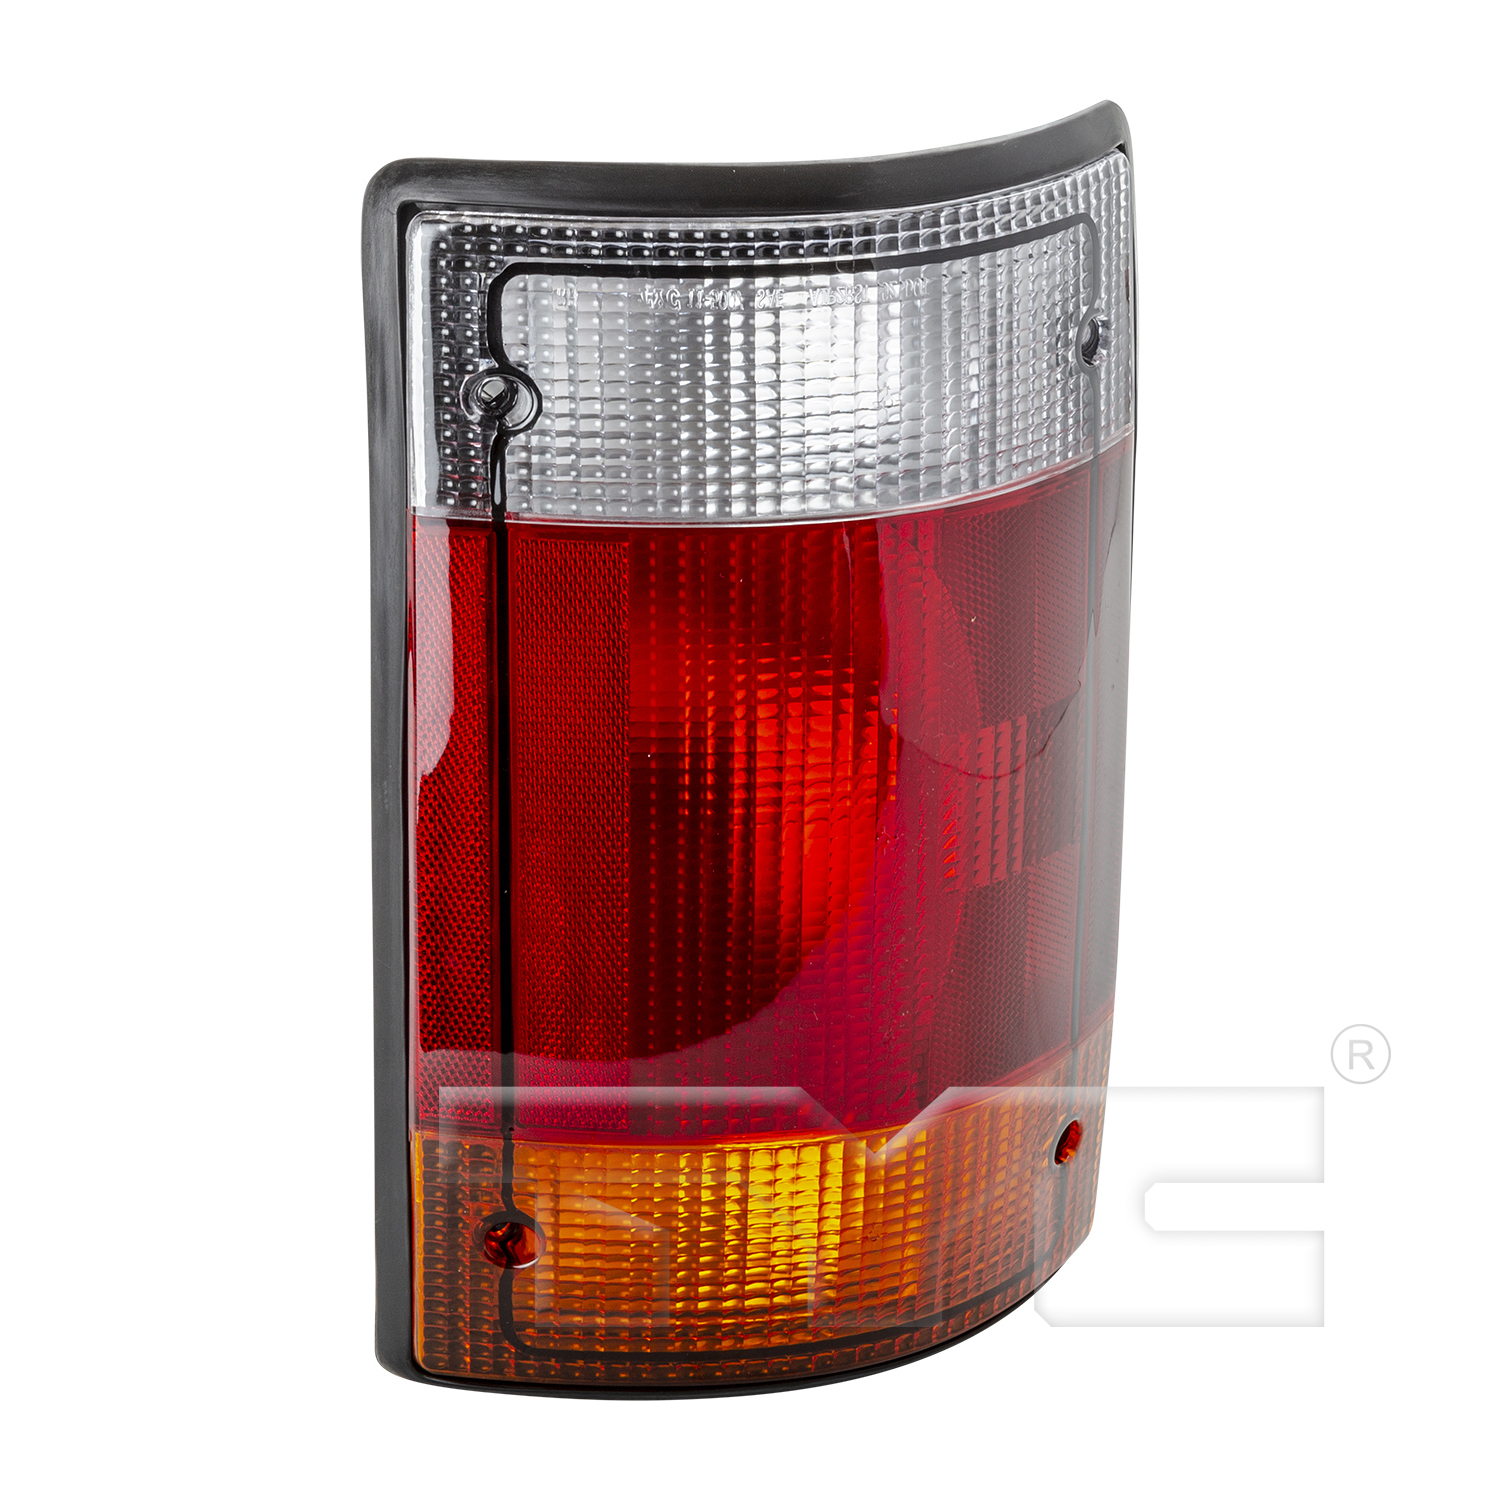 Aftermarket TAILLIGHTS for FORD - E-250 ECONOLINE, E-250 ECONOLINE,92-94,LT Taillamp assy